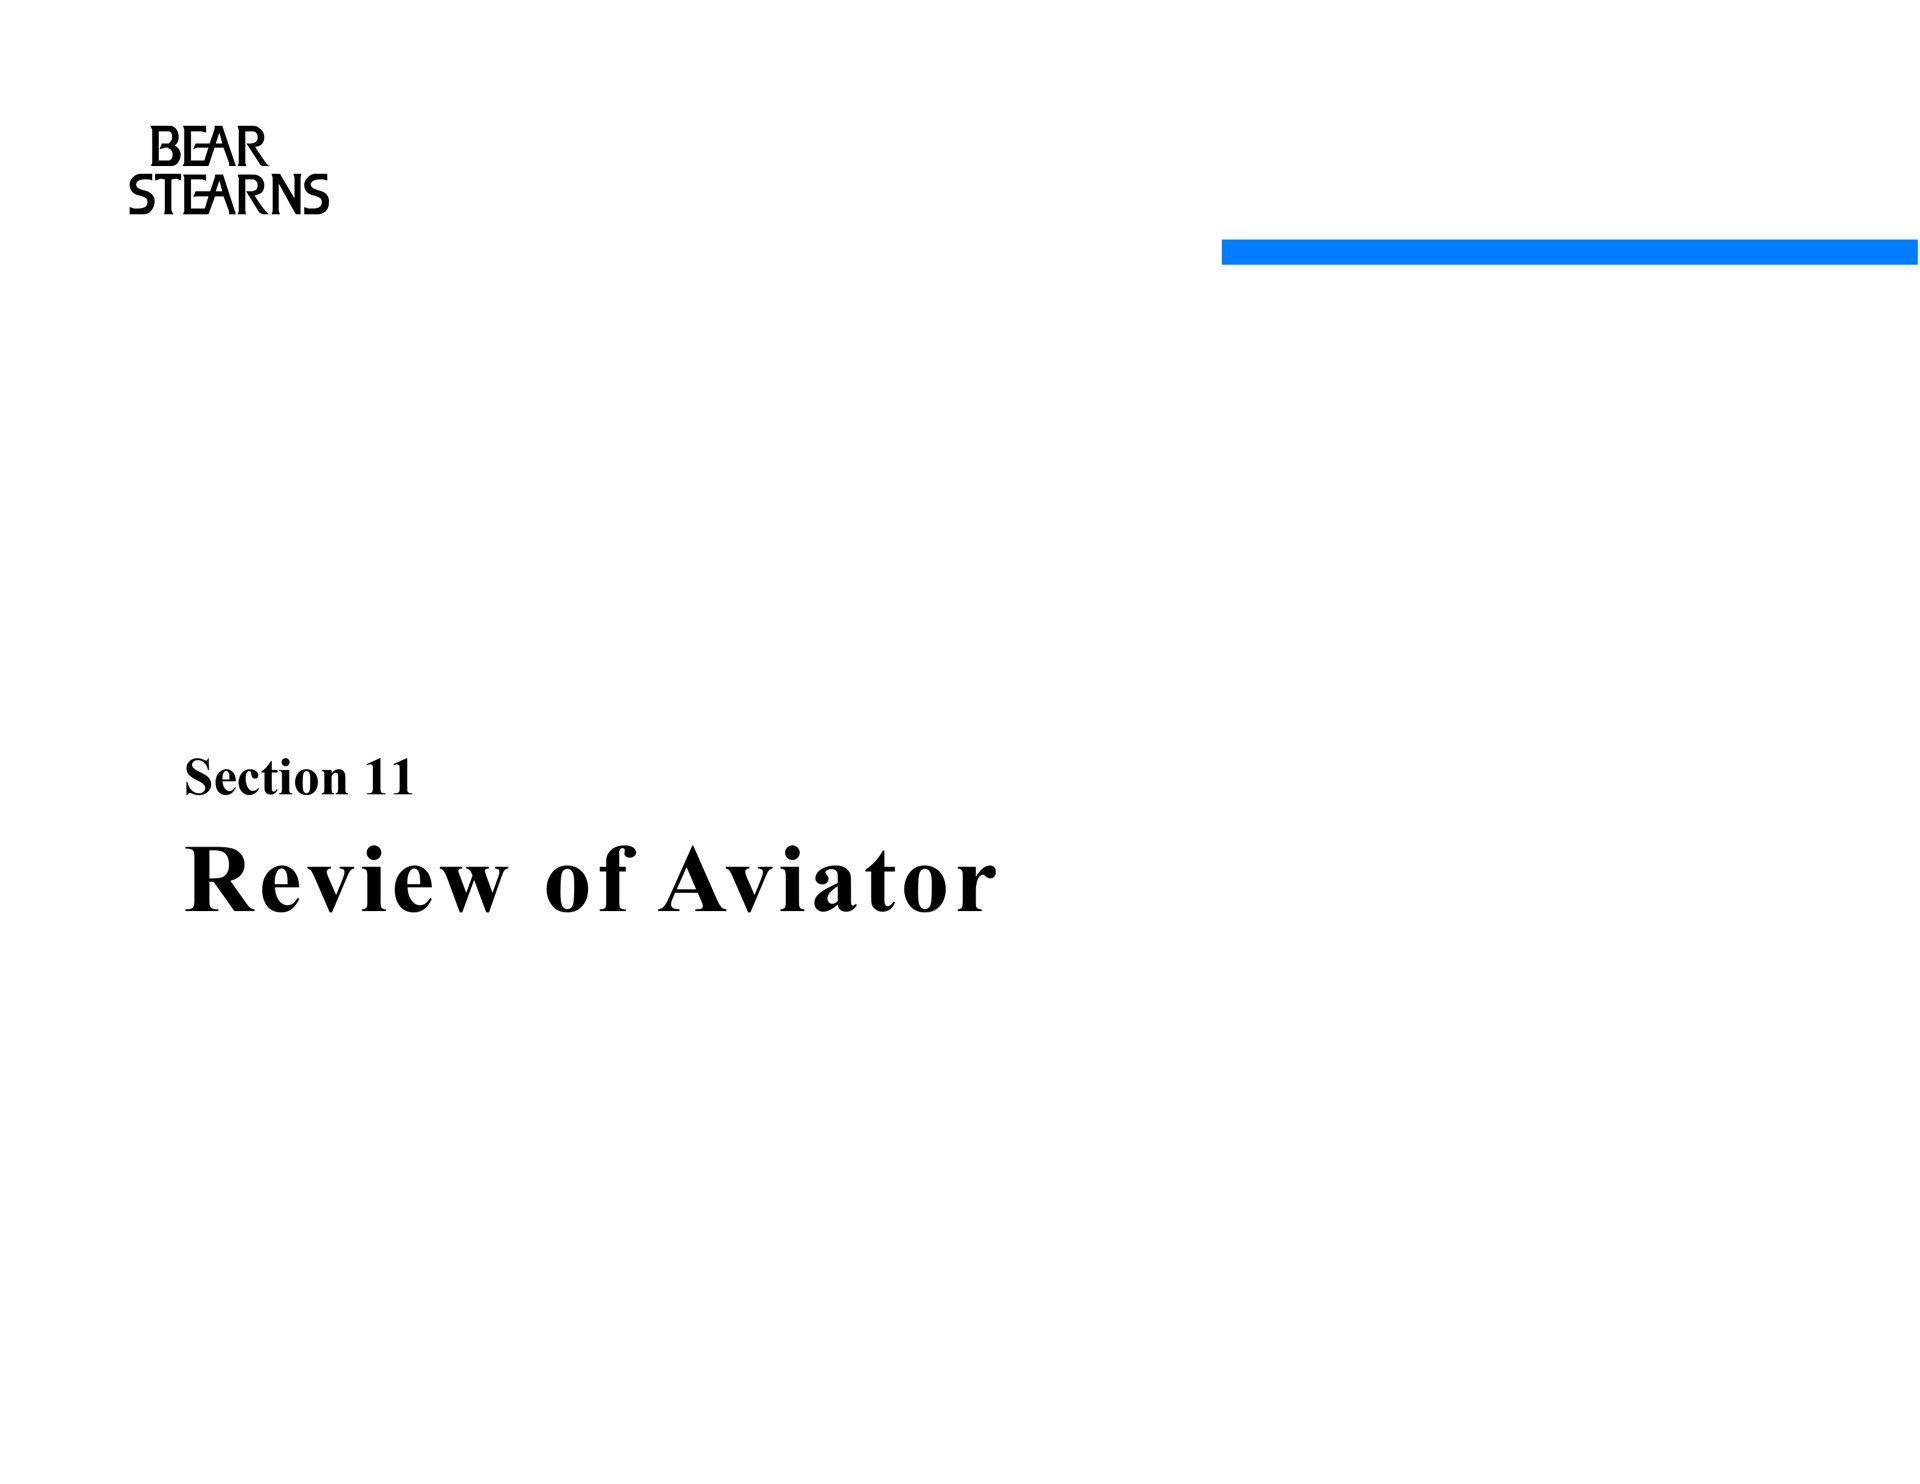 section review of aviator | Bear Stearns